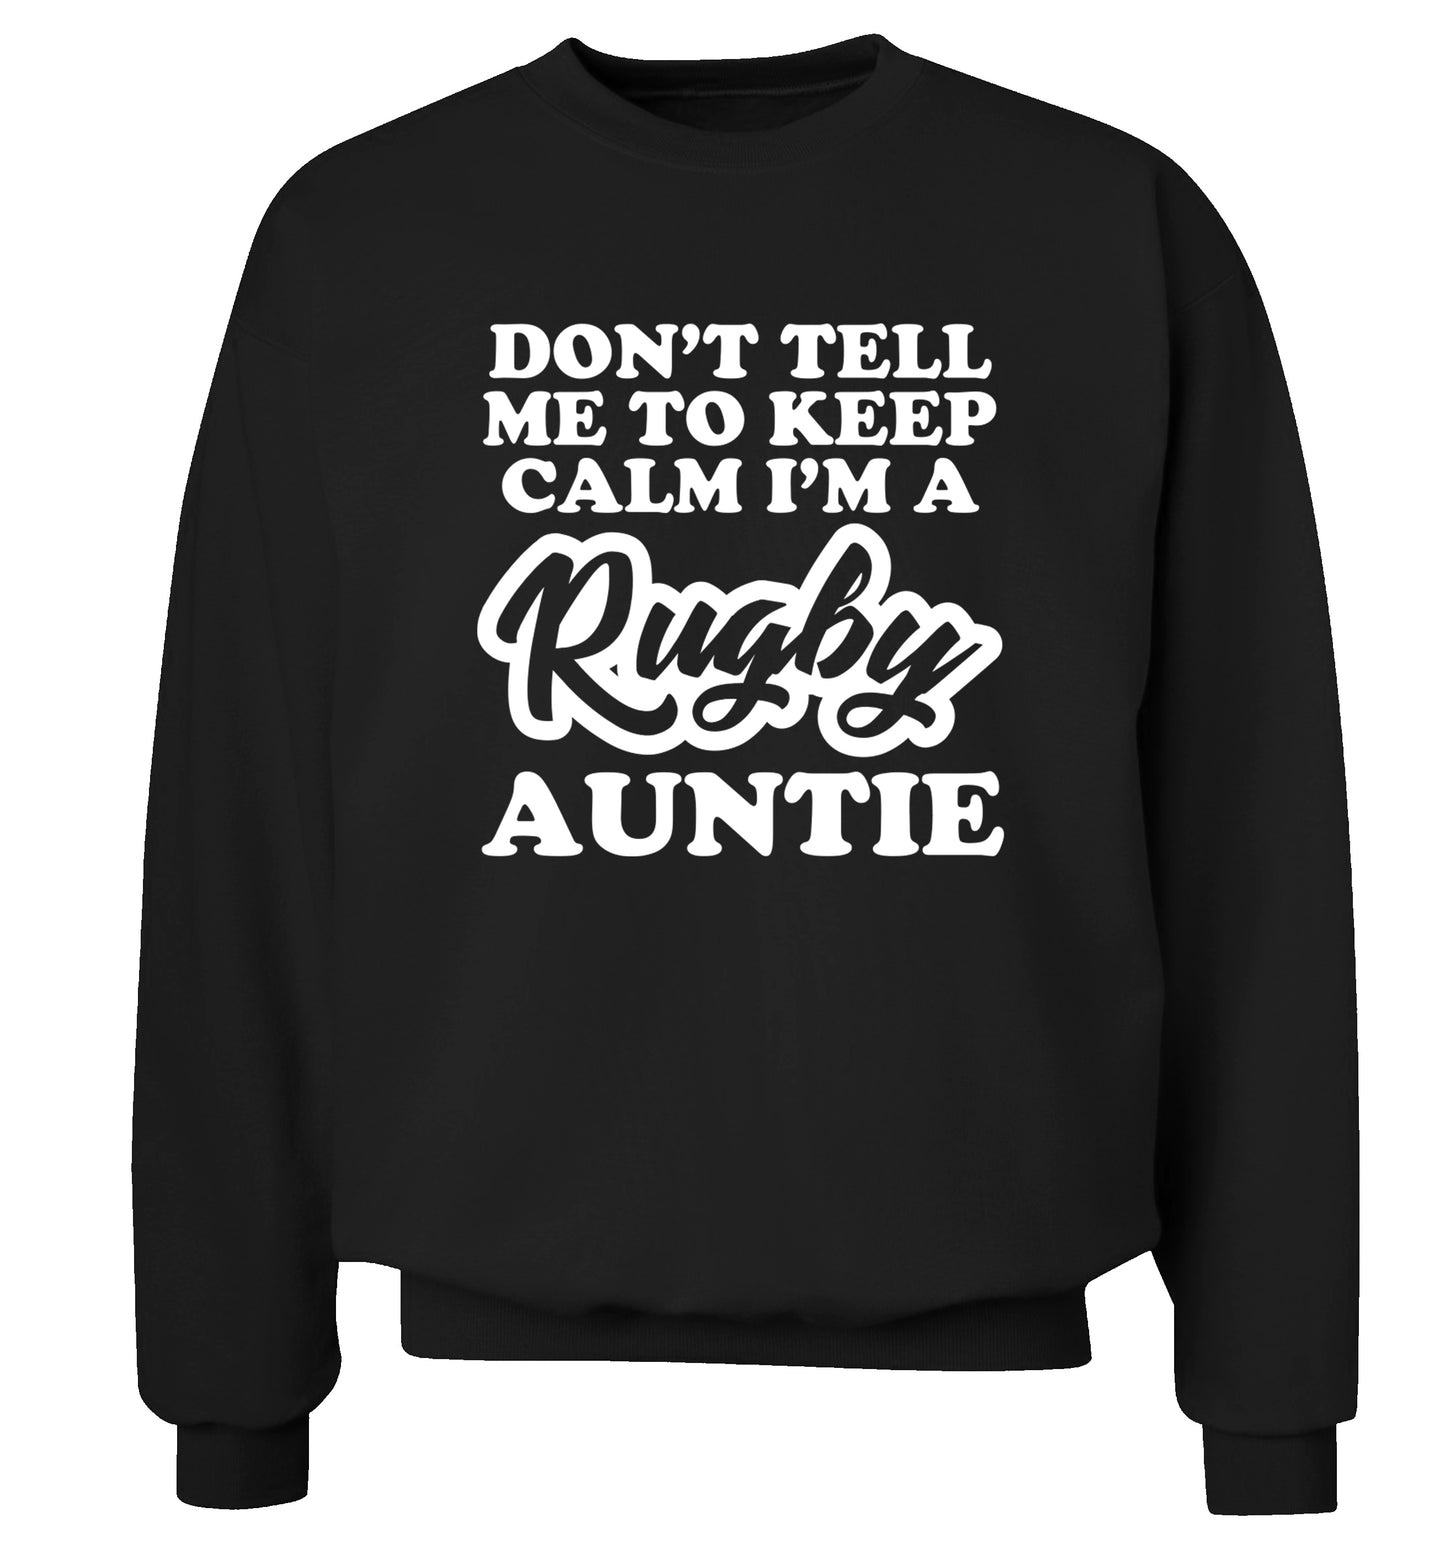 Don't tell me keep calm I'm a rugby auntie Adult's unisex black Sweater 2XL